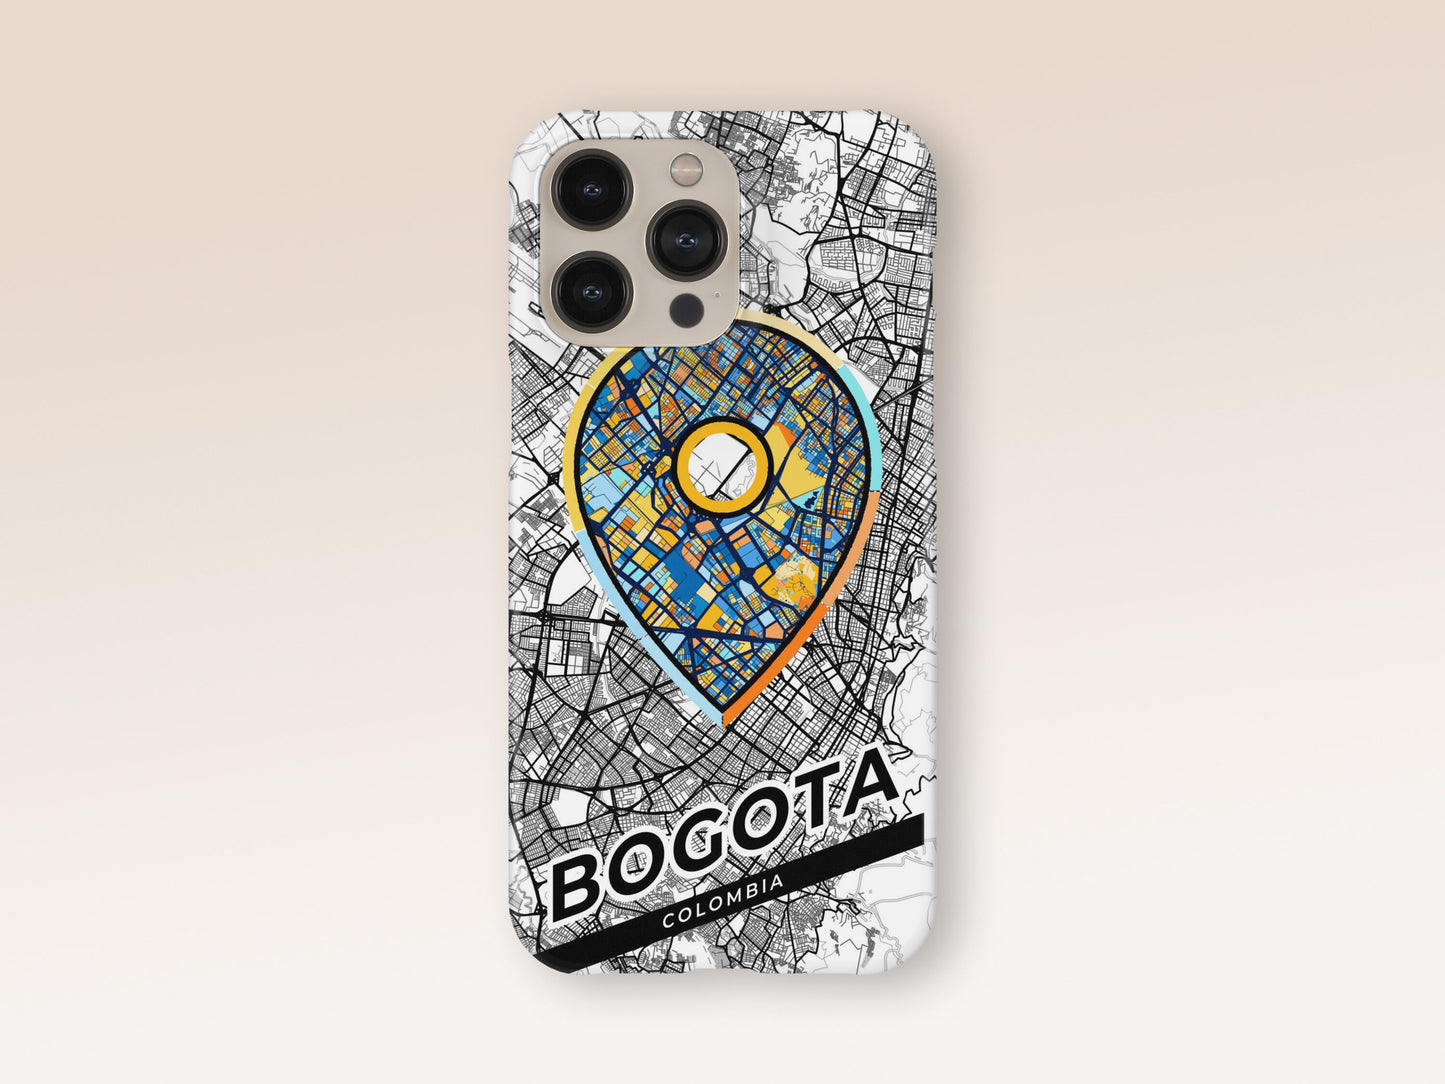 Bogota Colombia slim phone case with colorful icon. Birthday, wedding or housewarming gift. Couple match cases. 1